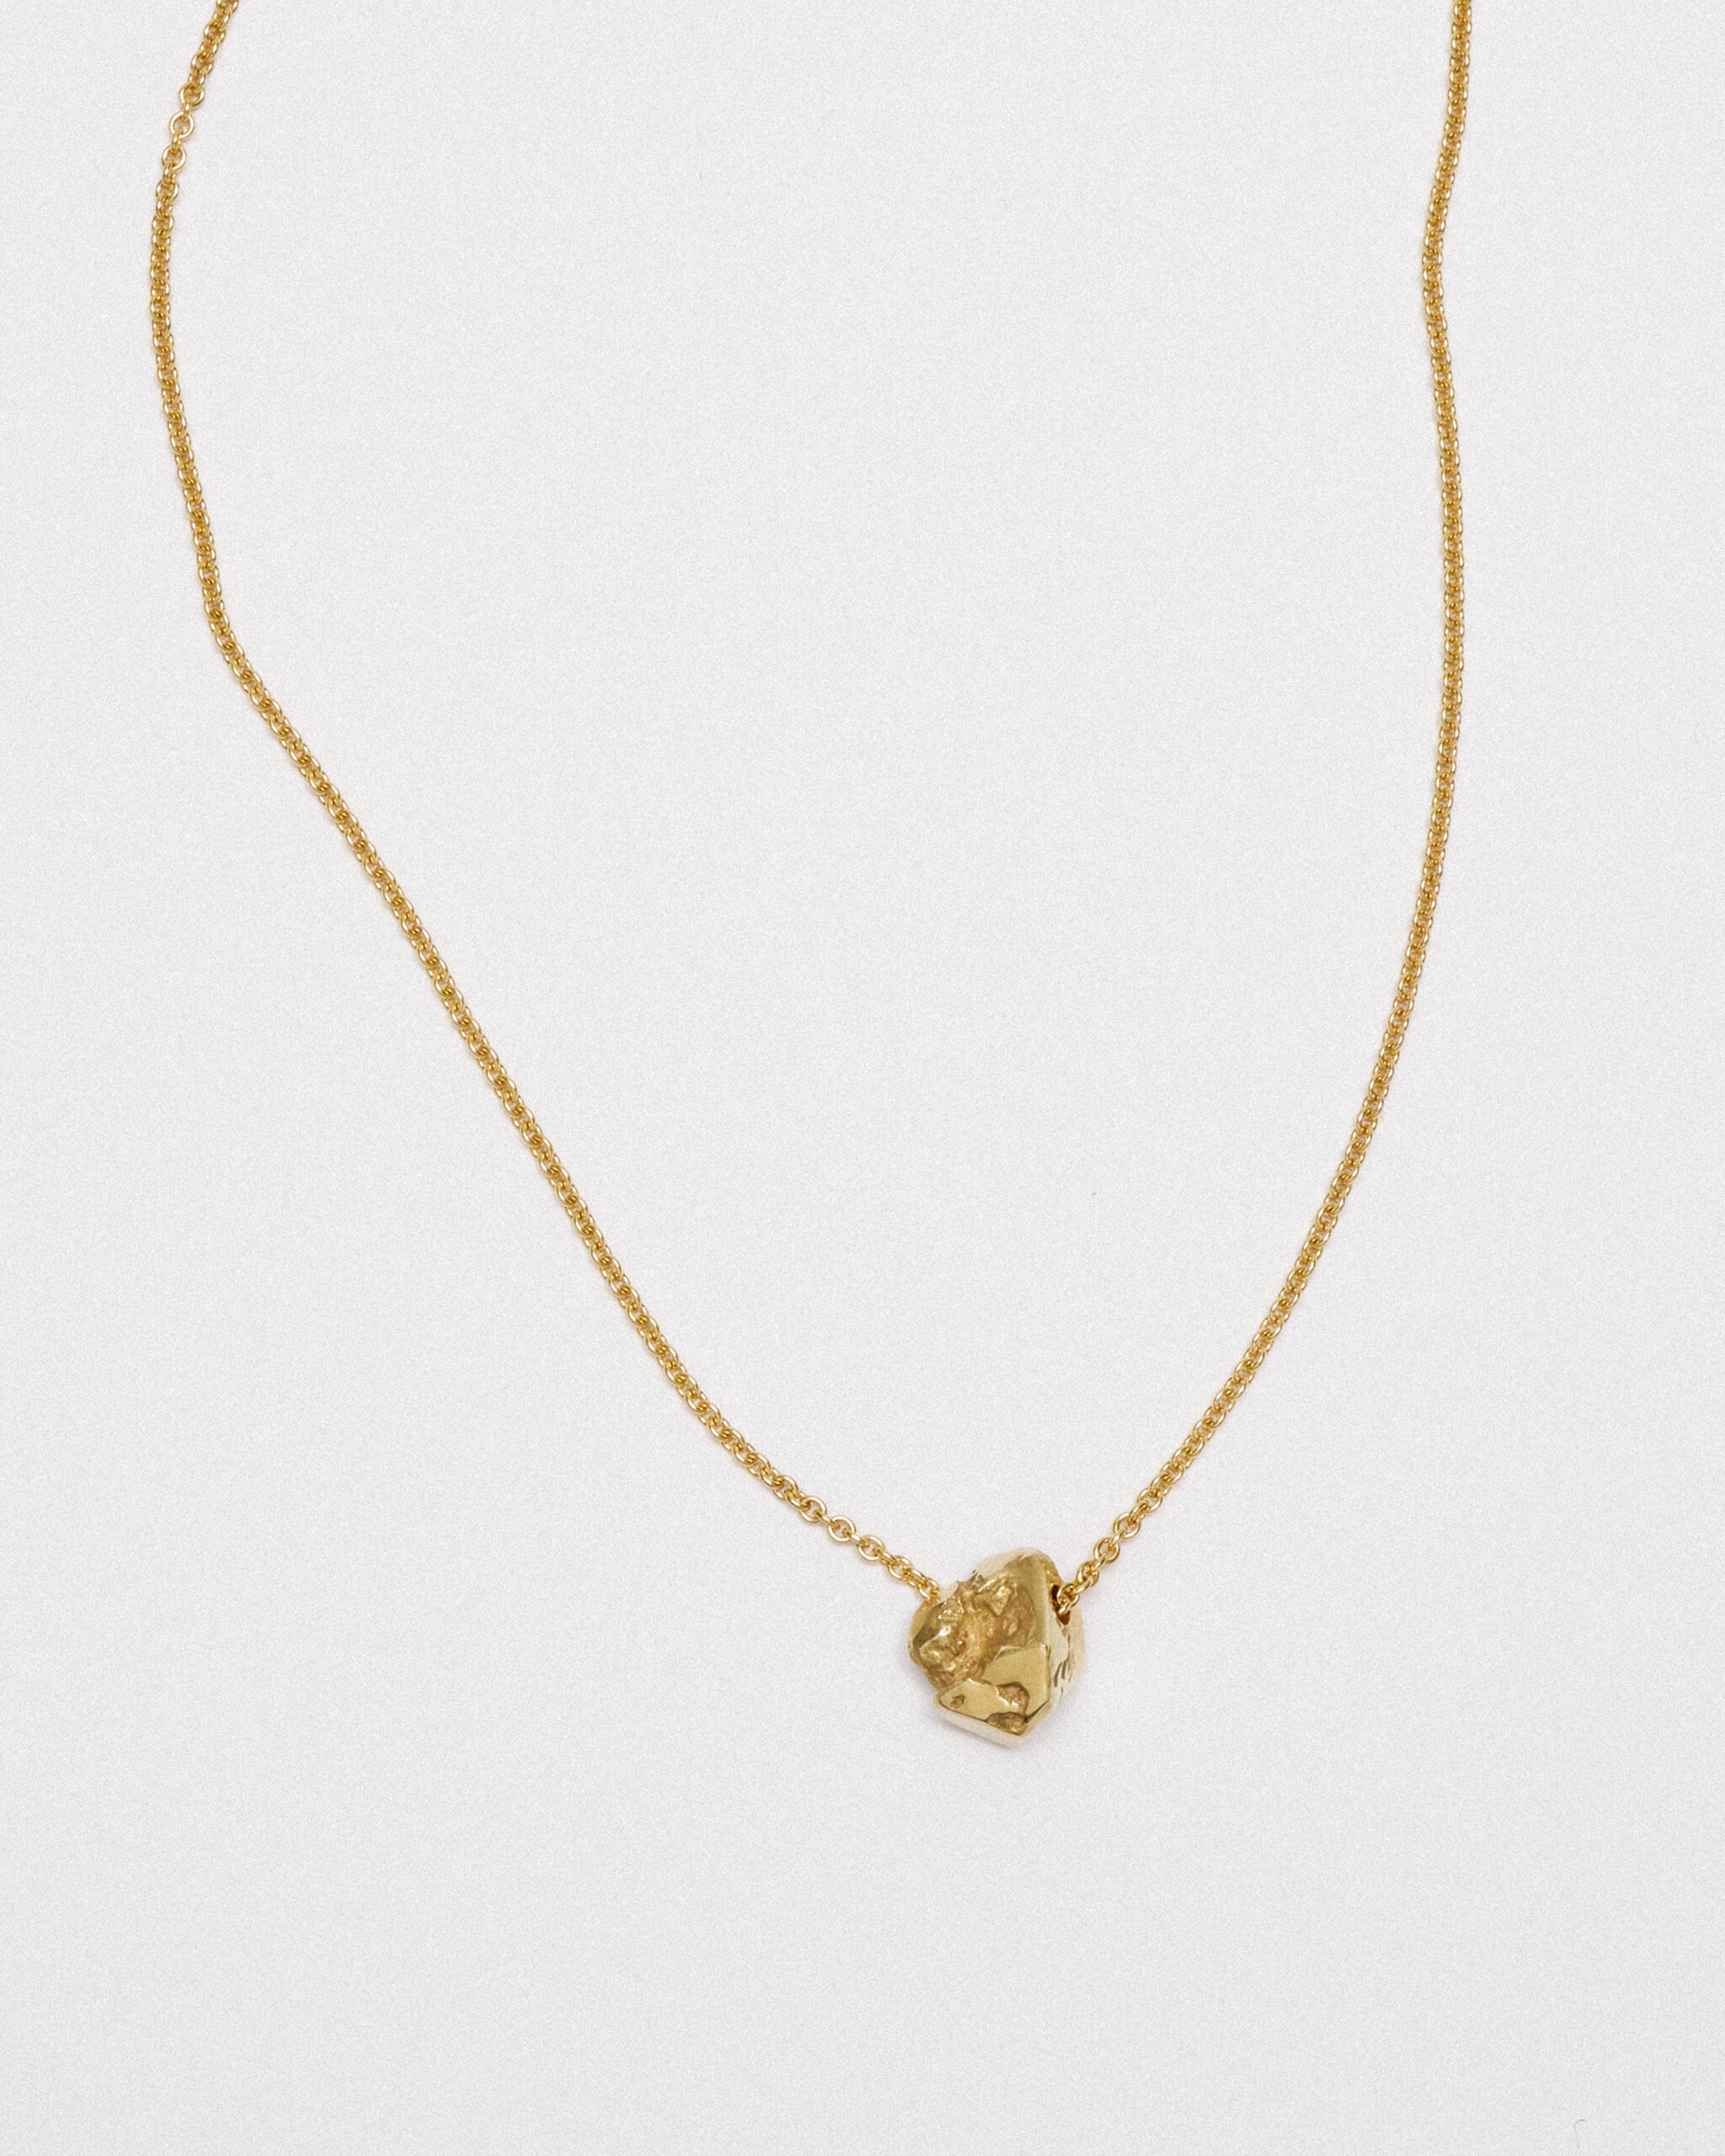 Stone necklace gold plated